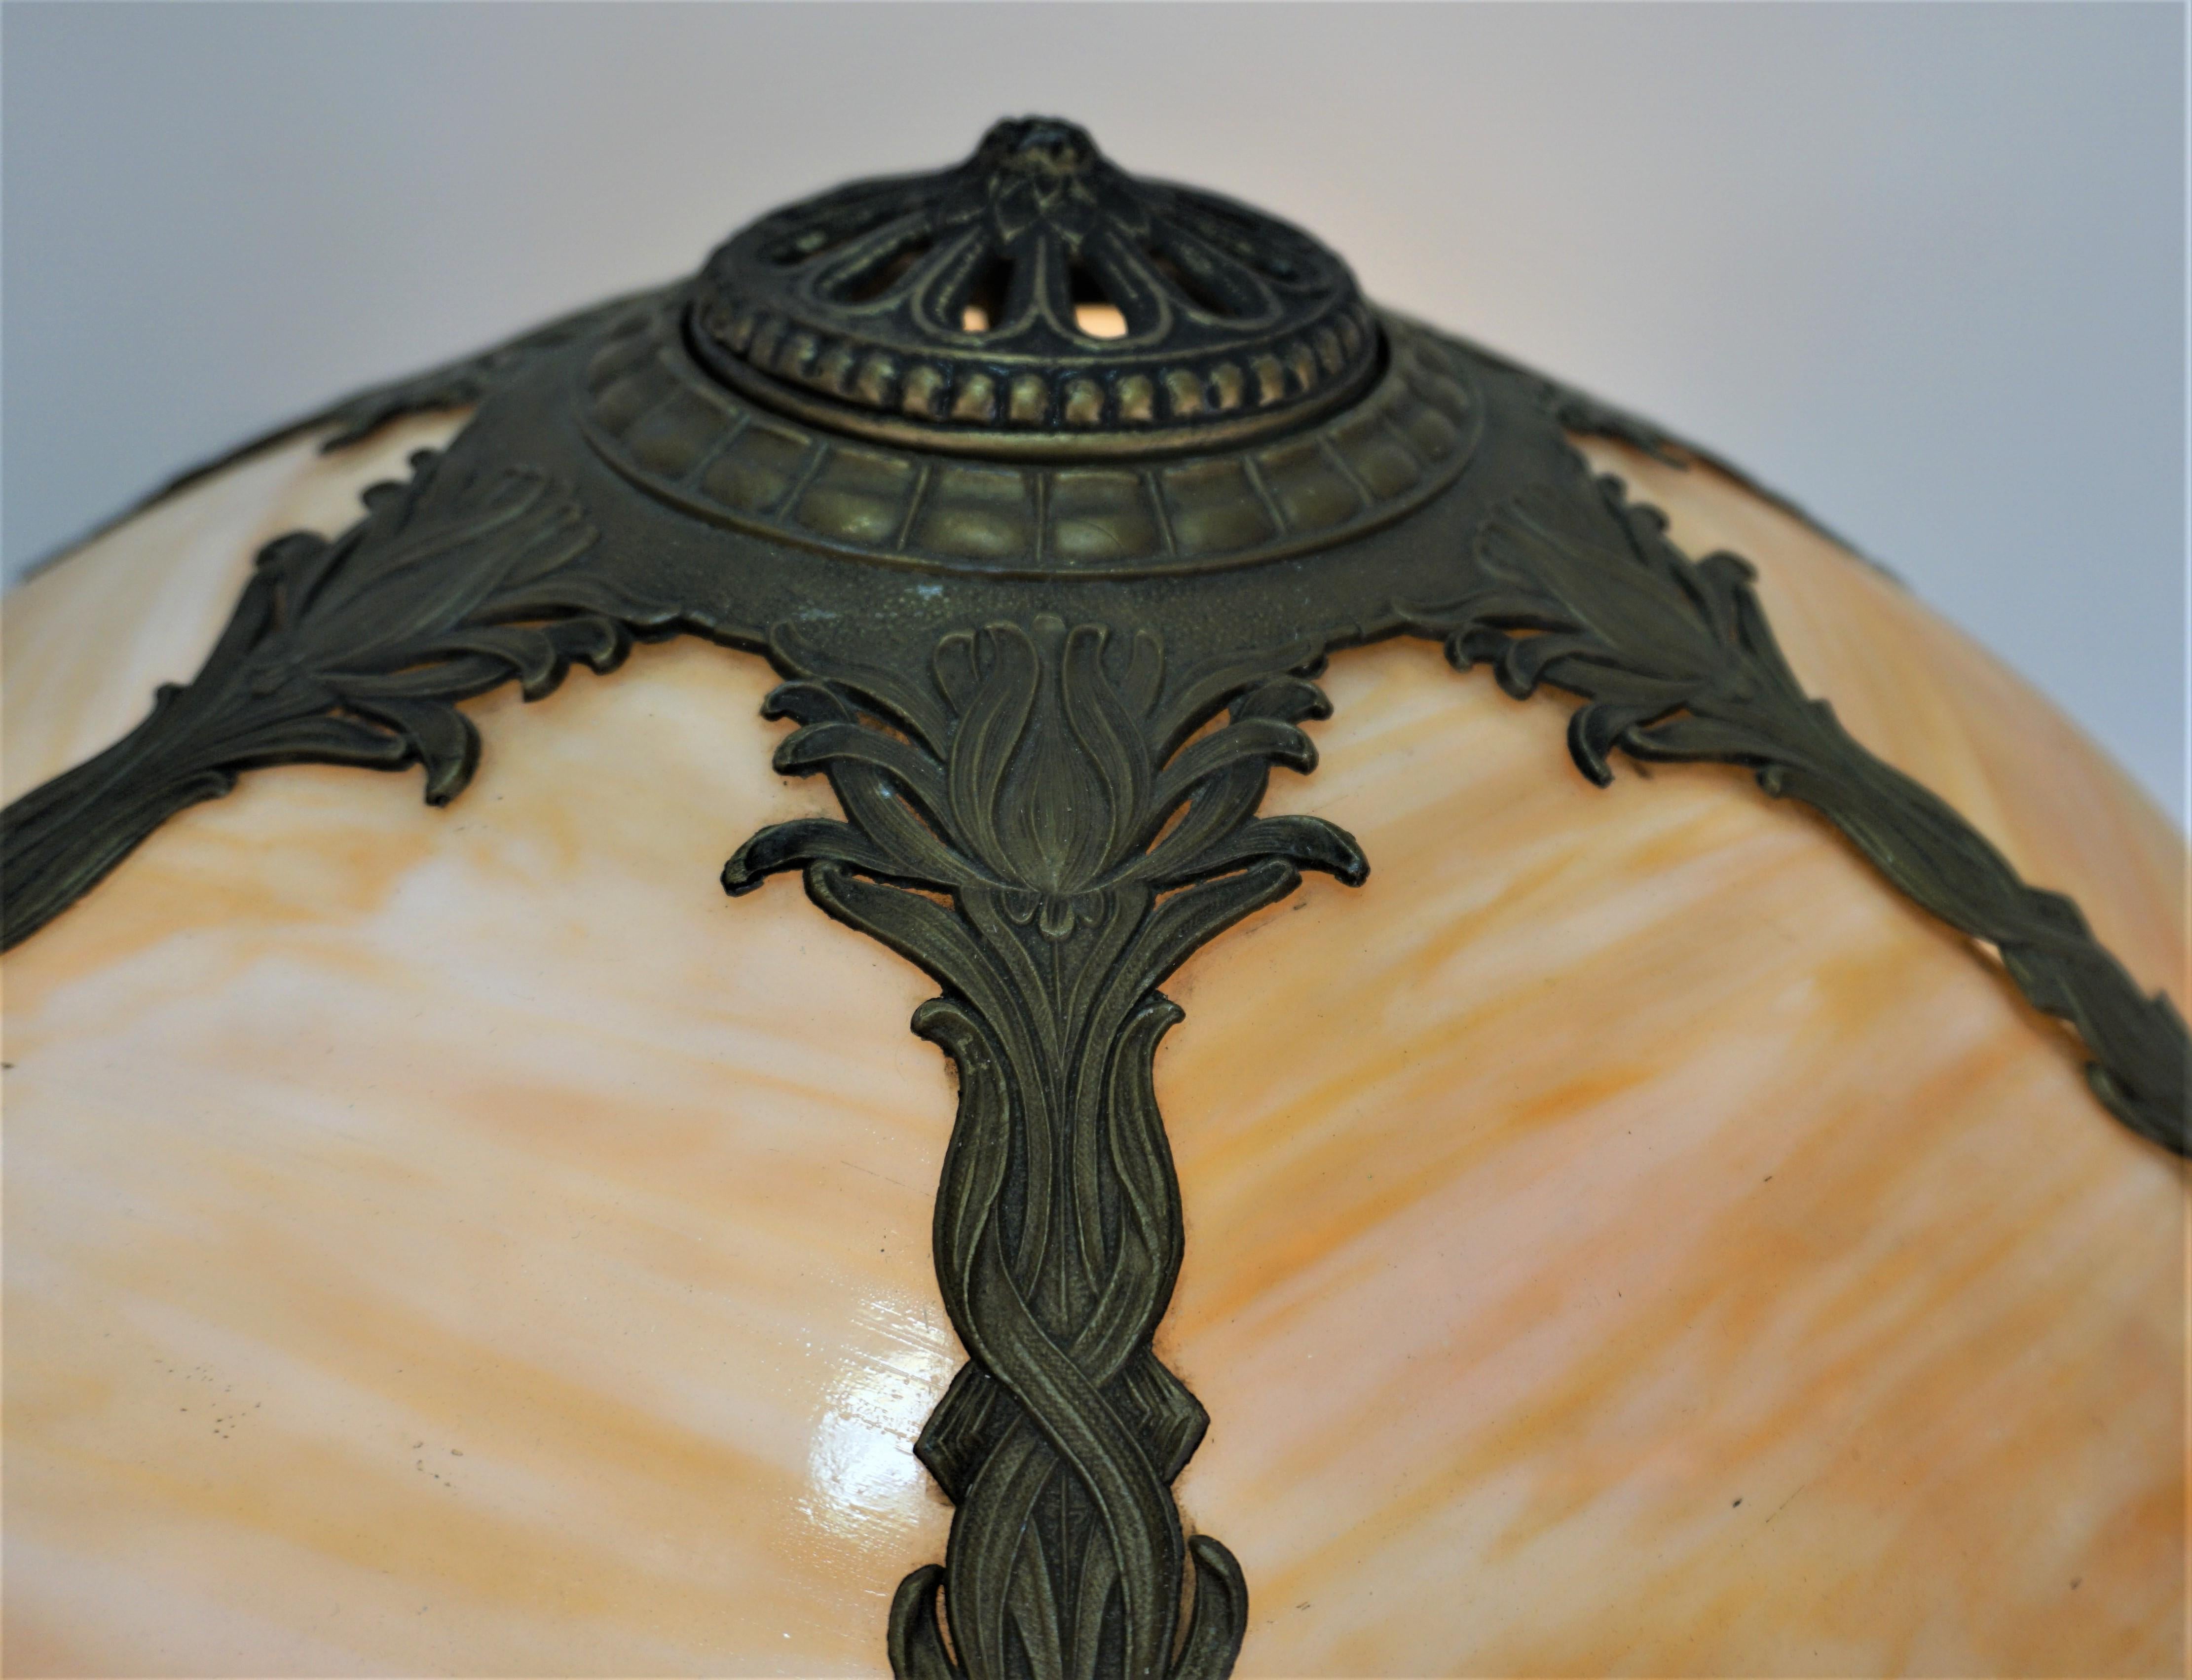 Cold-Painted American Art Nouveau American Slag Glass Table Lamp, Early 20th Century